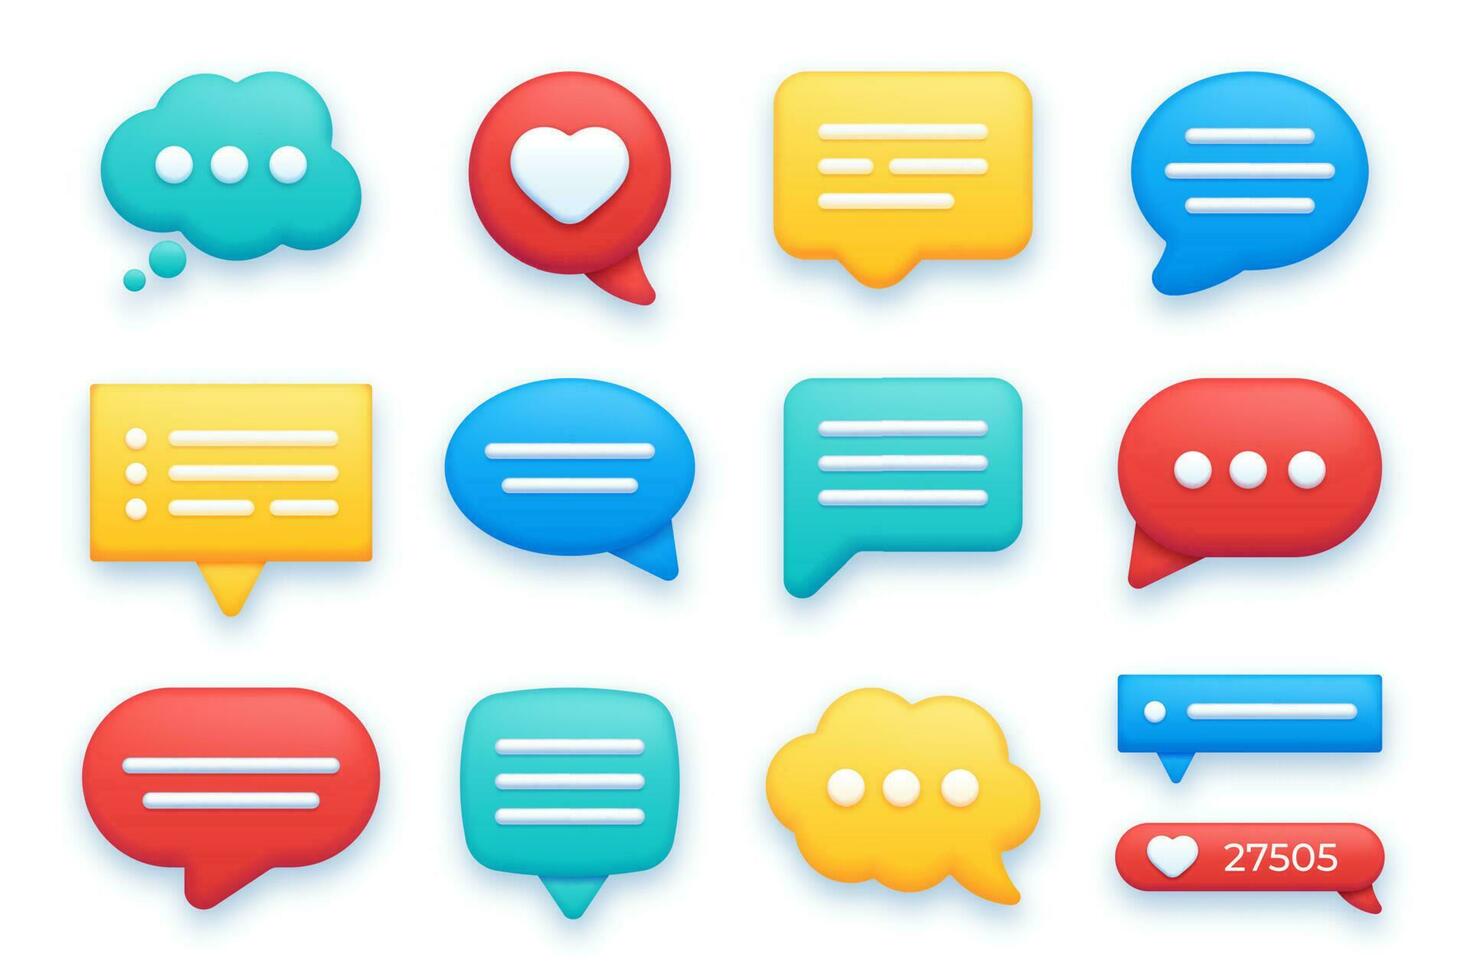 3d speech bubbles, thinking text bubble, chat and like icon. Social media communication, realistic texts message dialogue balloon vector set